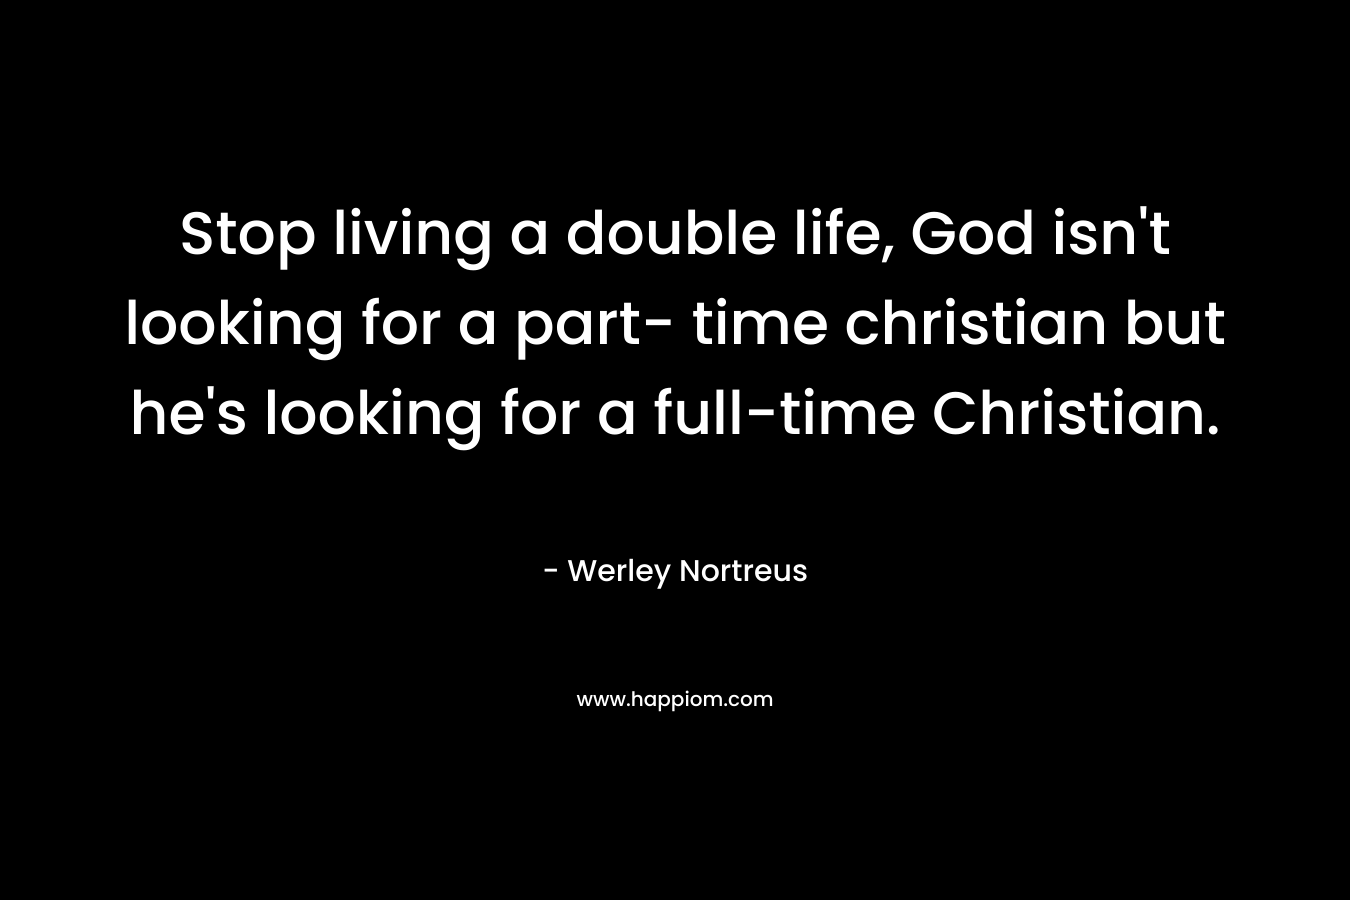 Stop living a double life, God isn’t looking for a part- time christian but he’s looking for a full-time Christian. – Werley Nortreus